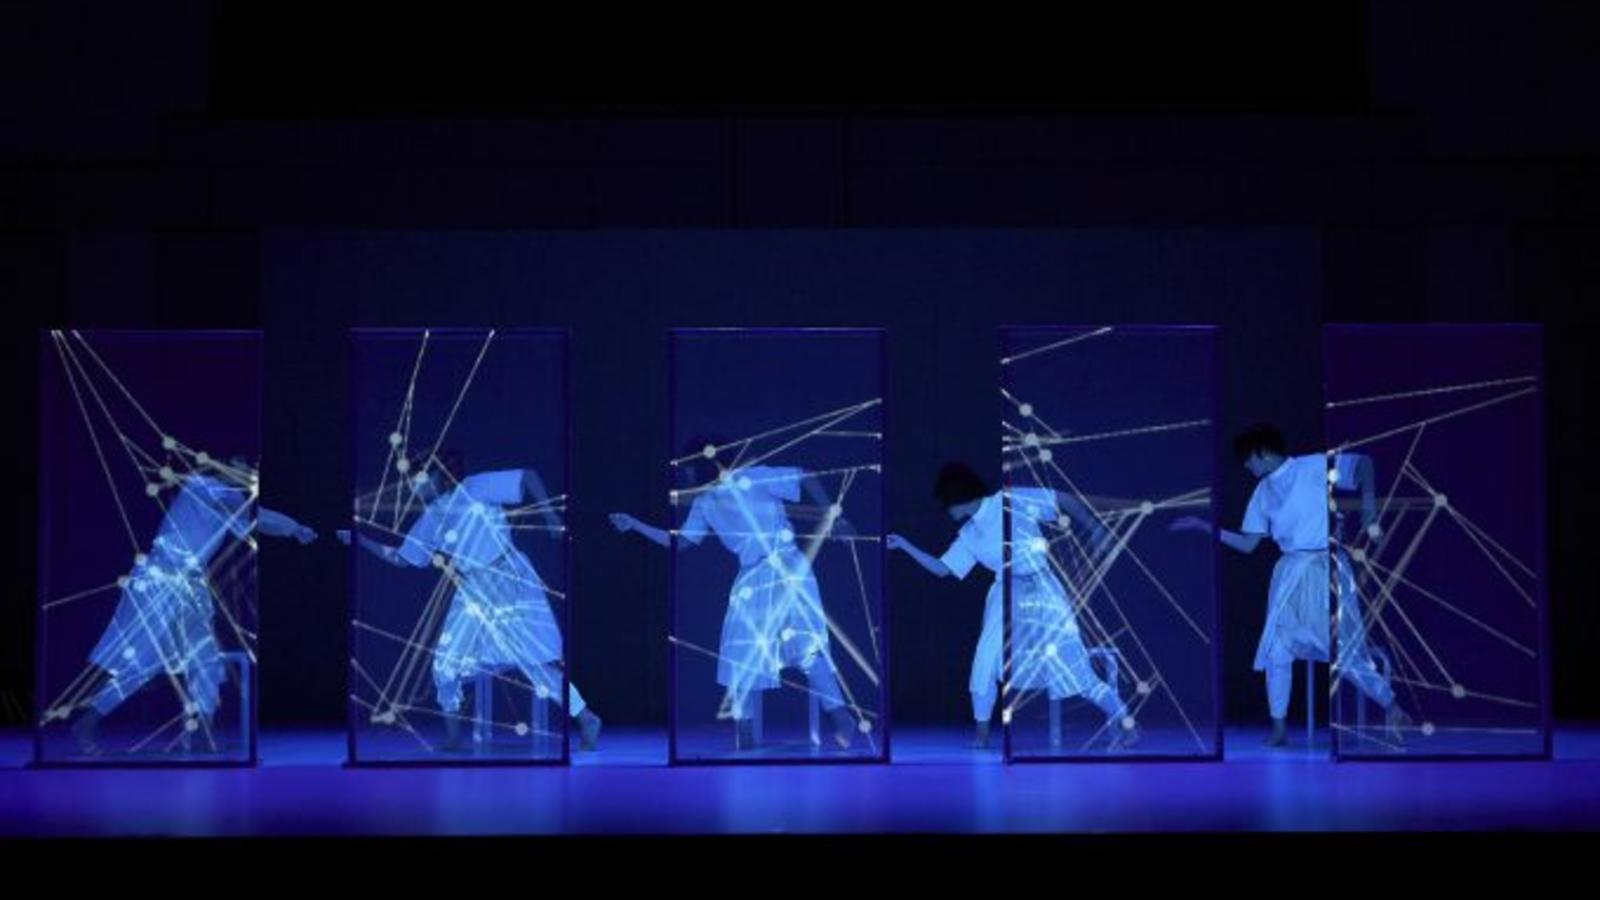 5 people in white behind clear screens on a dark stage